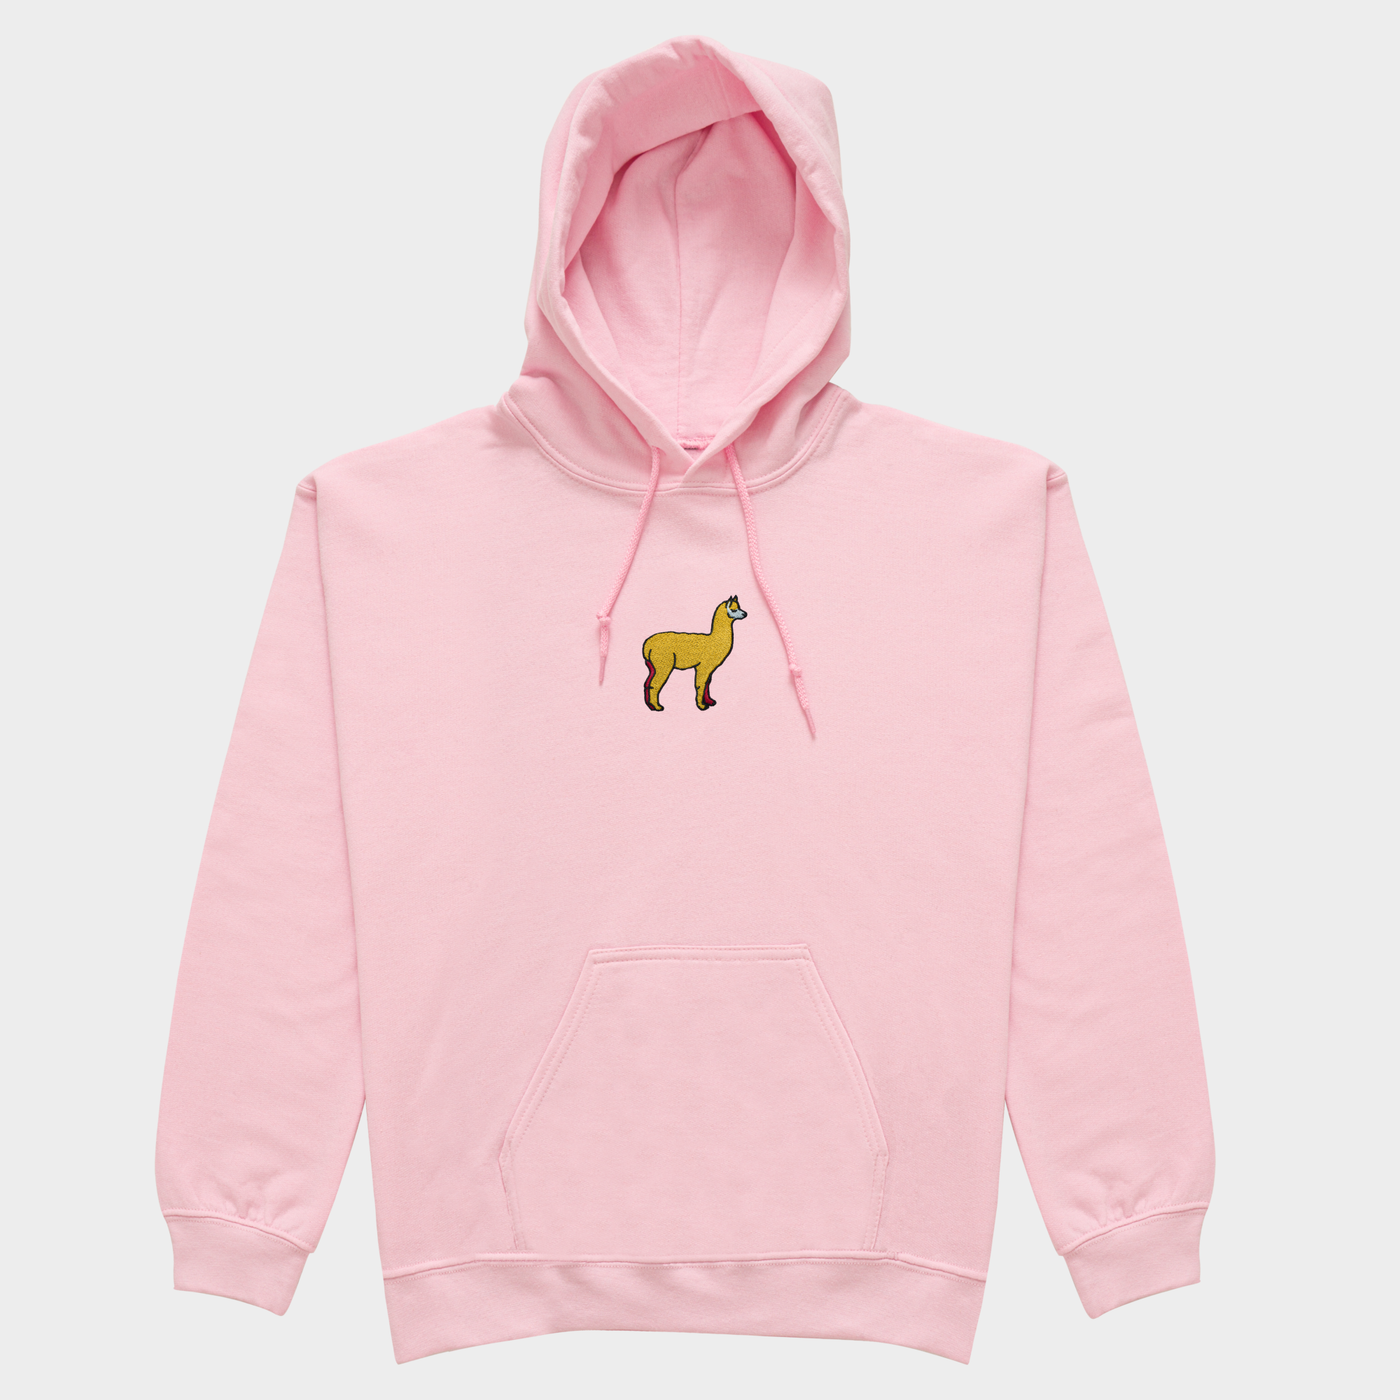 Bobby's Planet Women's Embroidered Alpaca Hoodie from South American Amazon Animals Collection in Light Pink Color#color_light-pink